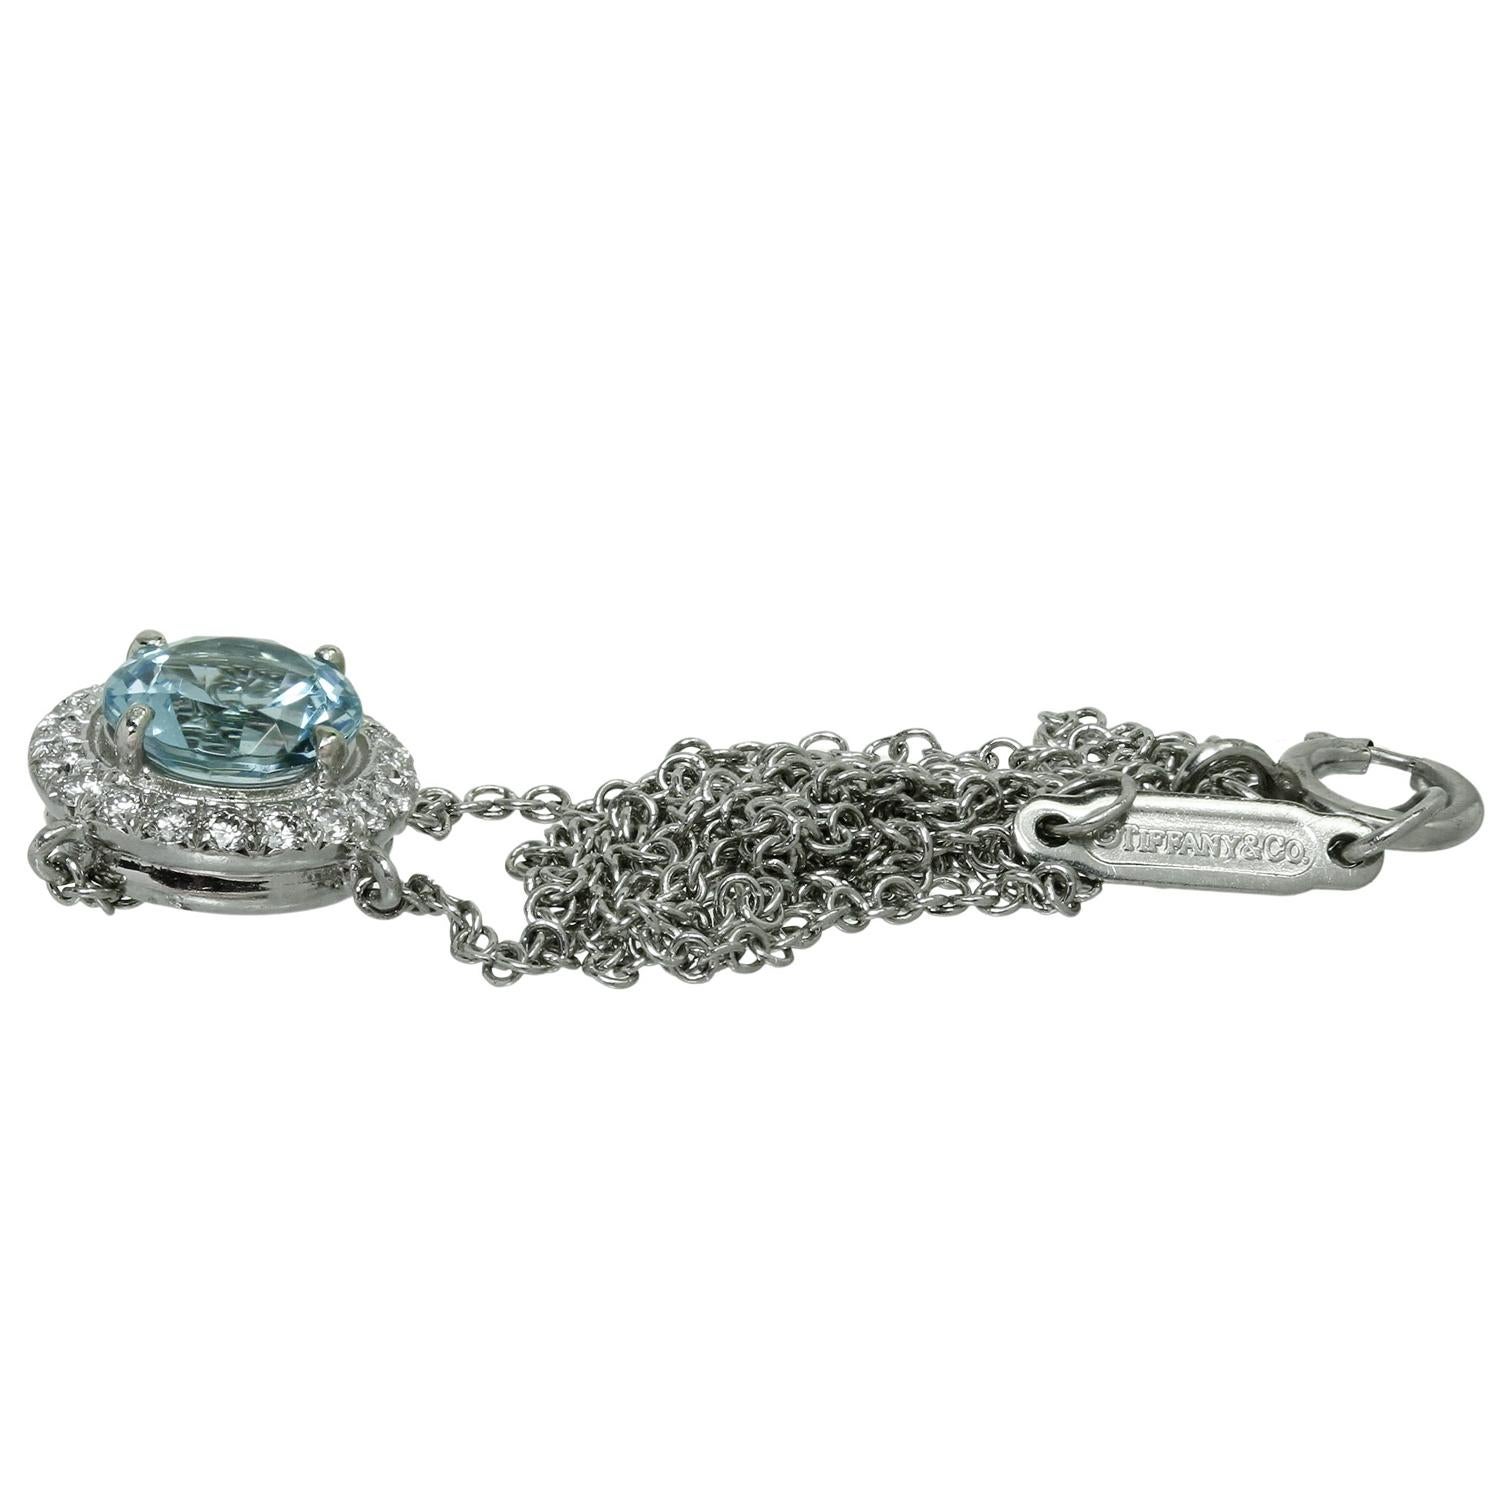 This gorgeous Tiffany & Co. necklace from the sophisticated Soleste collection is crafted in platinum and features a round pendant set with a blue aqumarine weighing an estimated 0.70 carats surrounded with brilliant-cut round diamonds weighing an